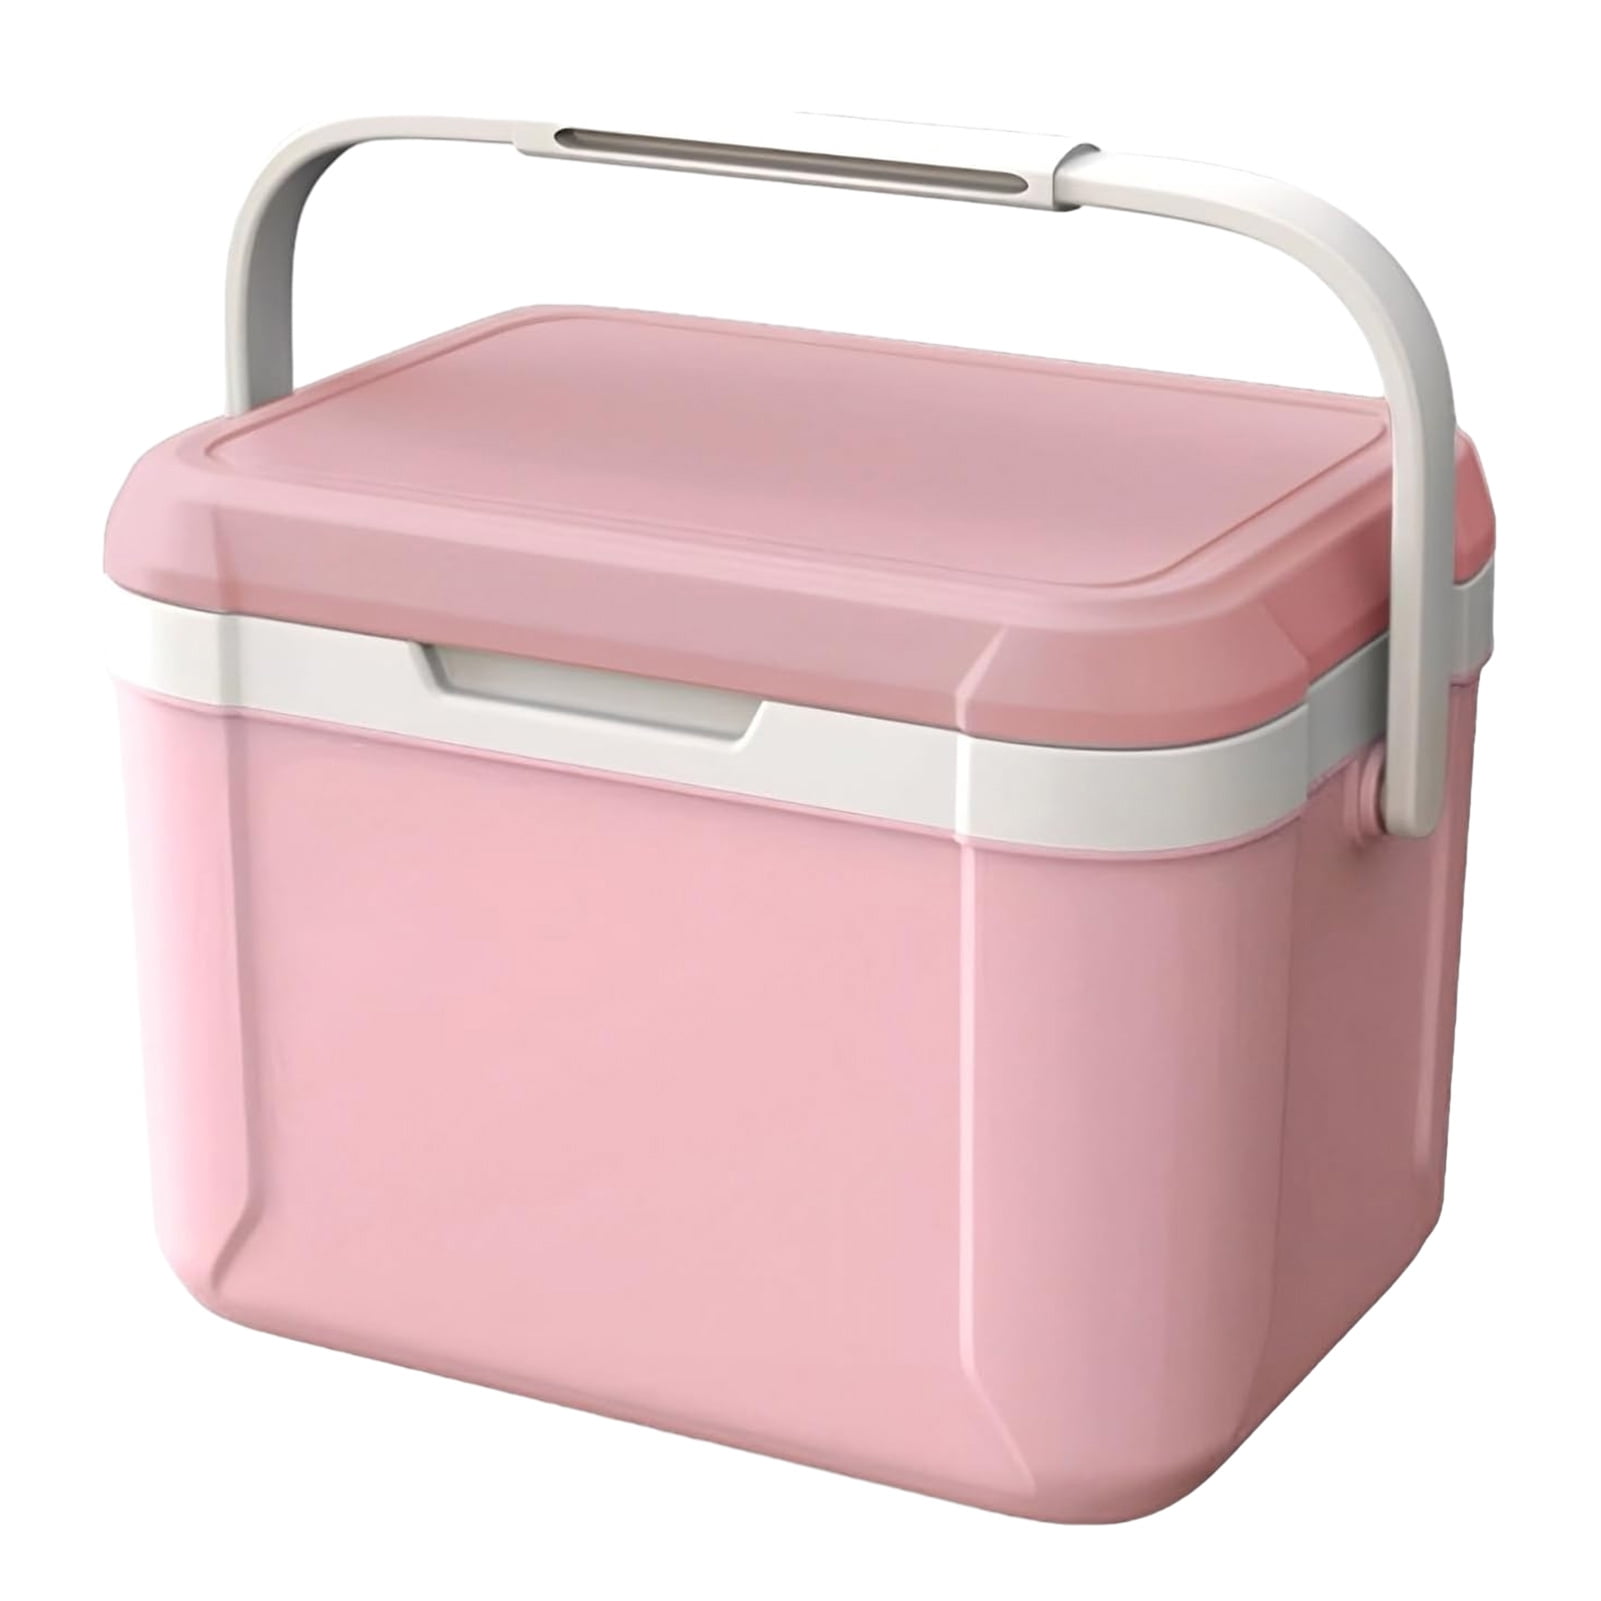 HiGropcore 6 Quart Small Cooler - Portable Hard Shell Cooler Lunch Box -  Ice Retention Insulated Camping Cooler LS6-02